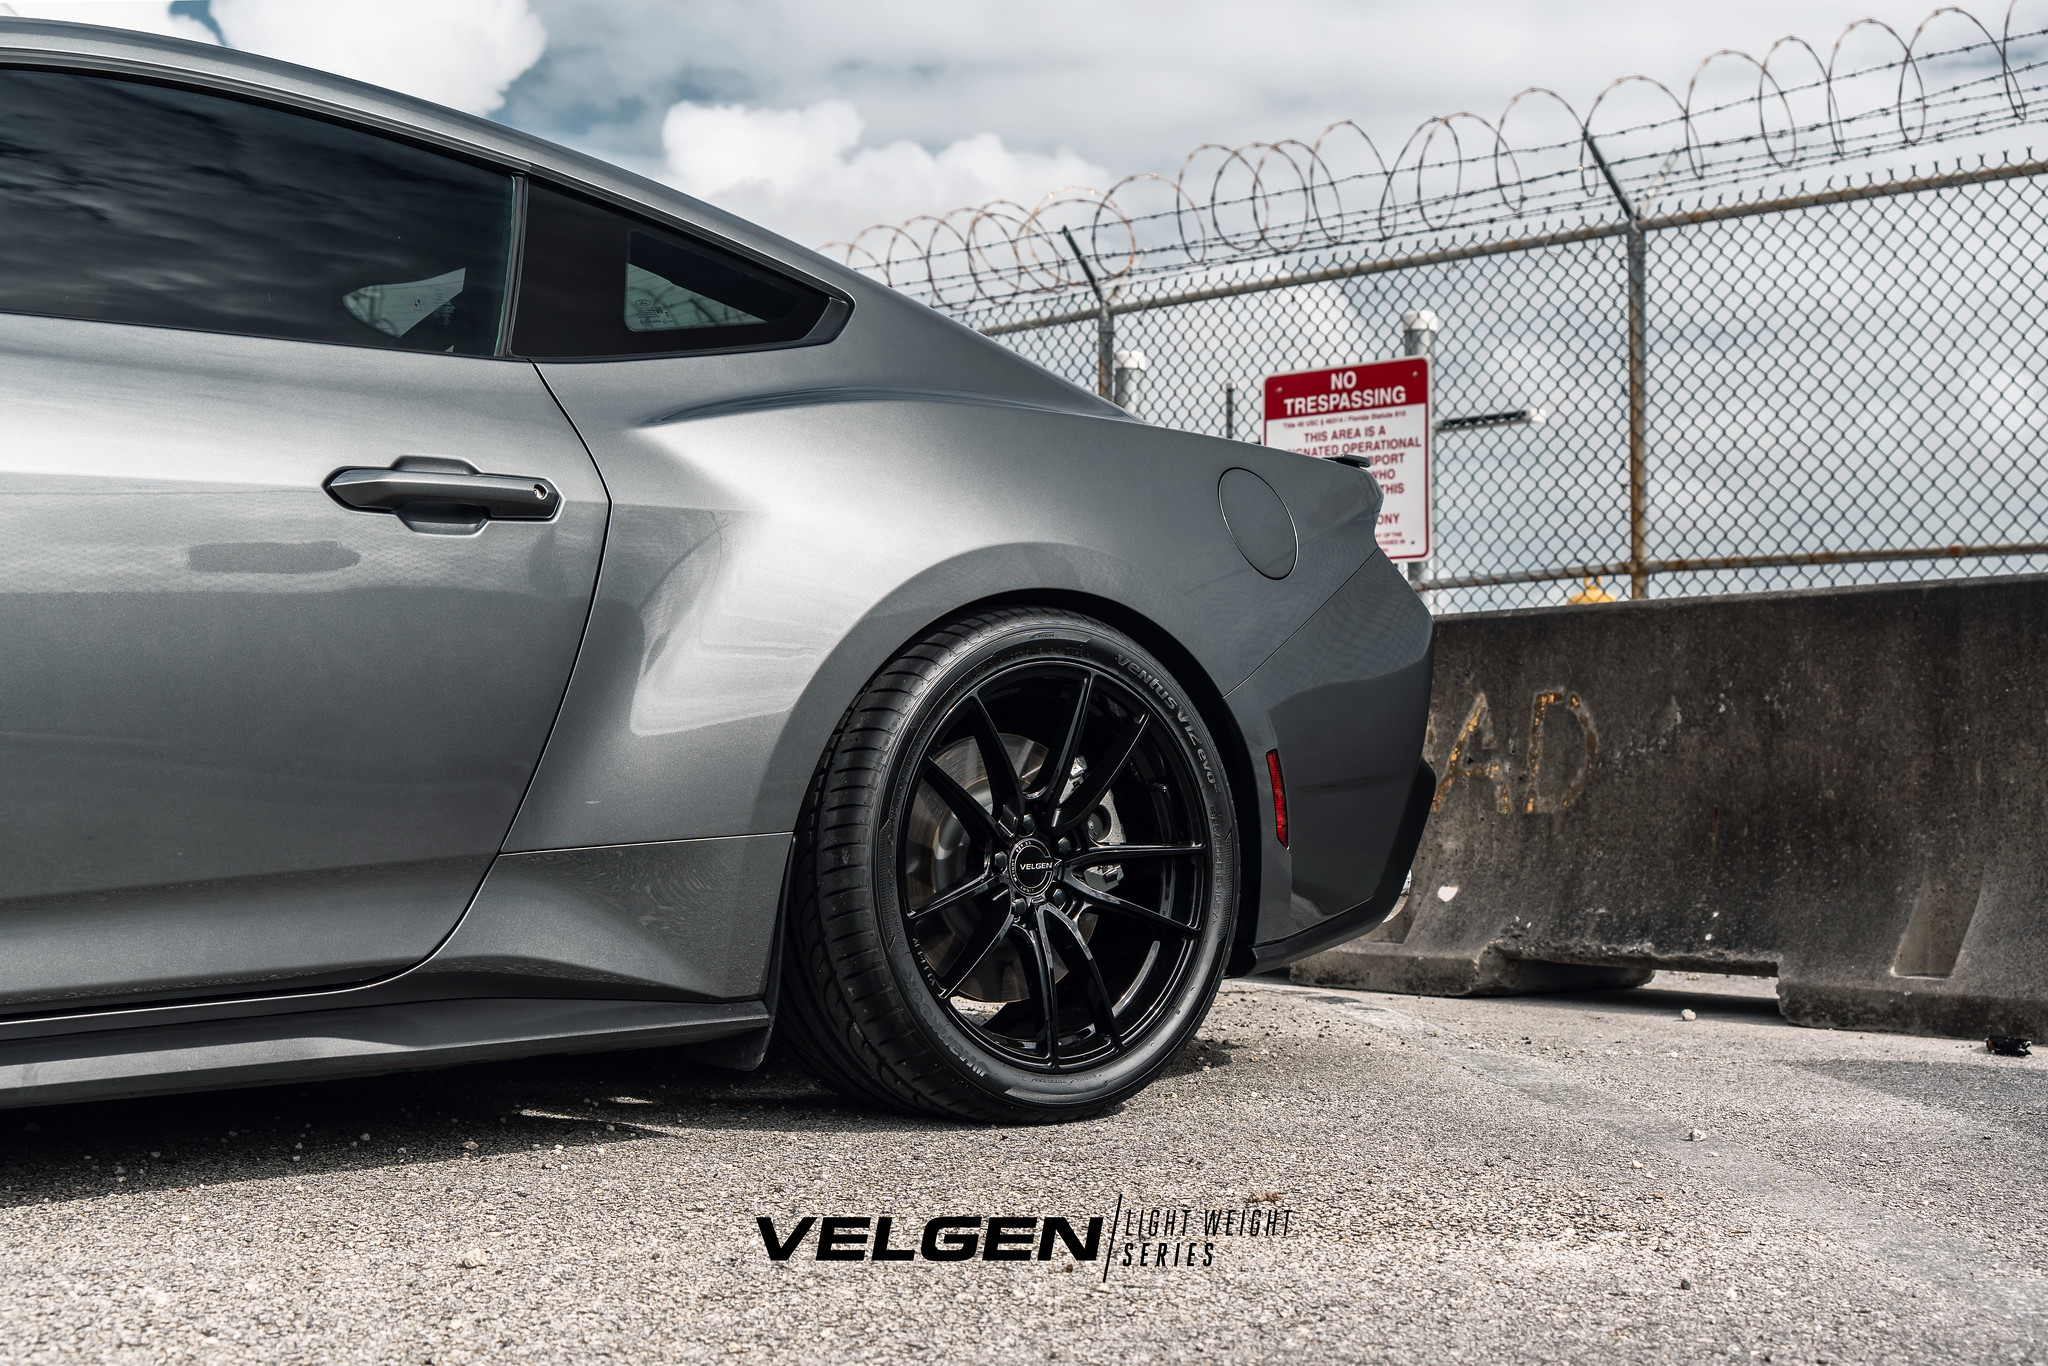 S650 Mustang Velgen wheels for your S650 Mustang | Vibe Motorsports 53544125624_e071c7a8a8_k